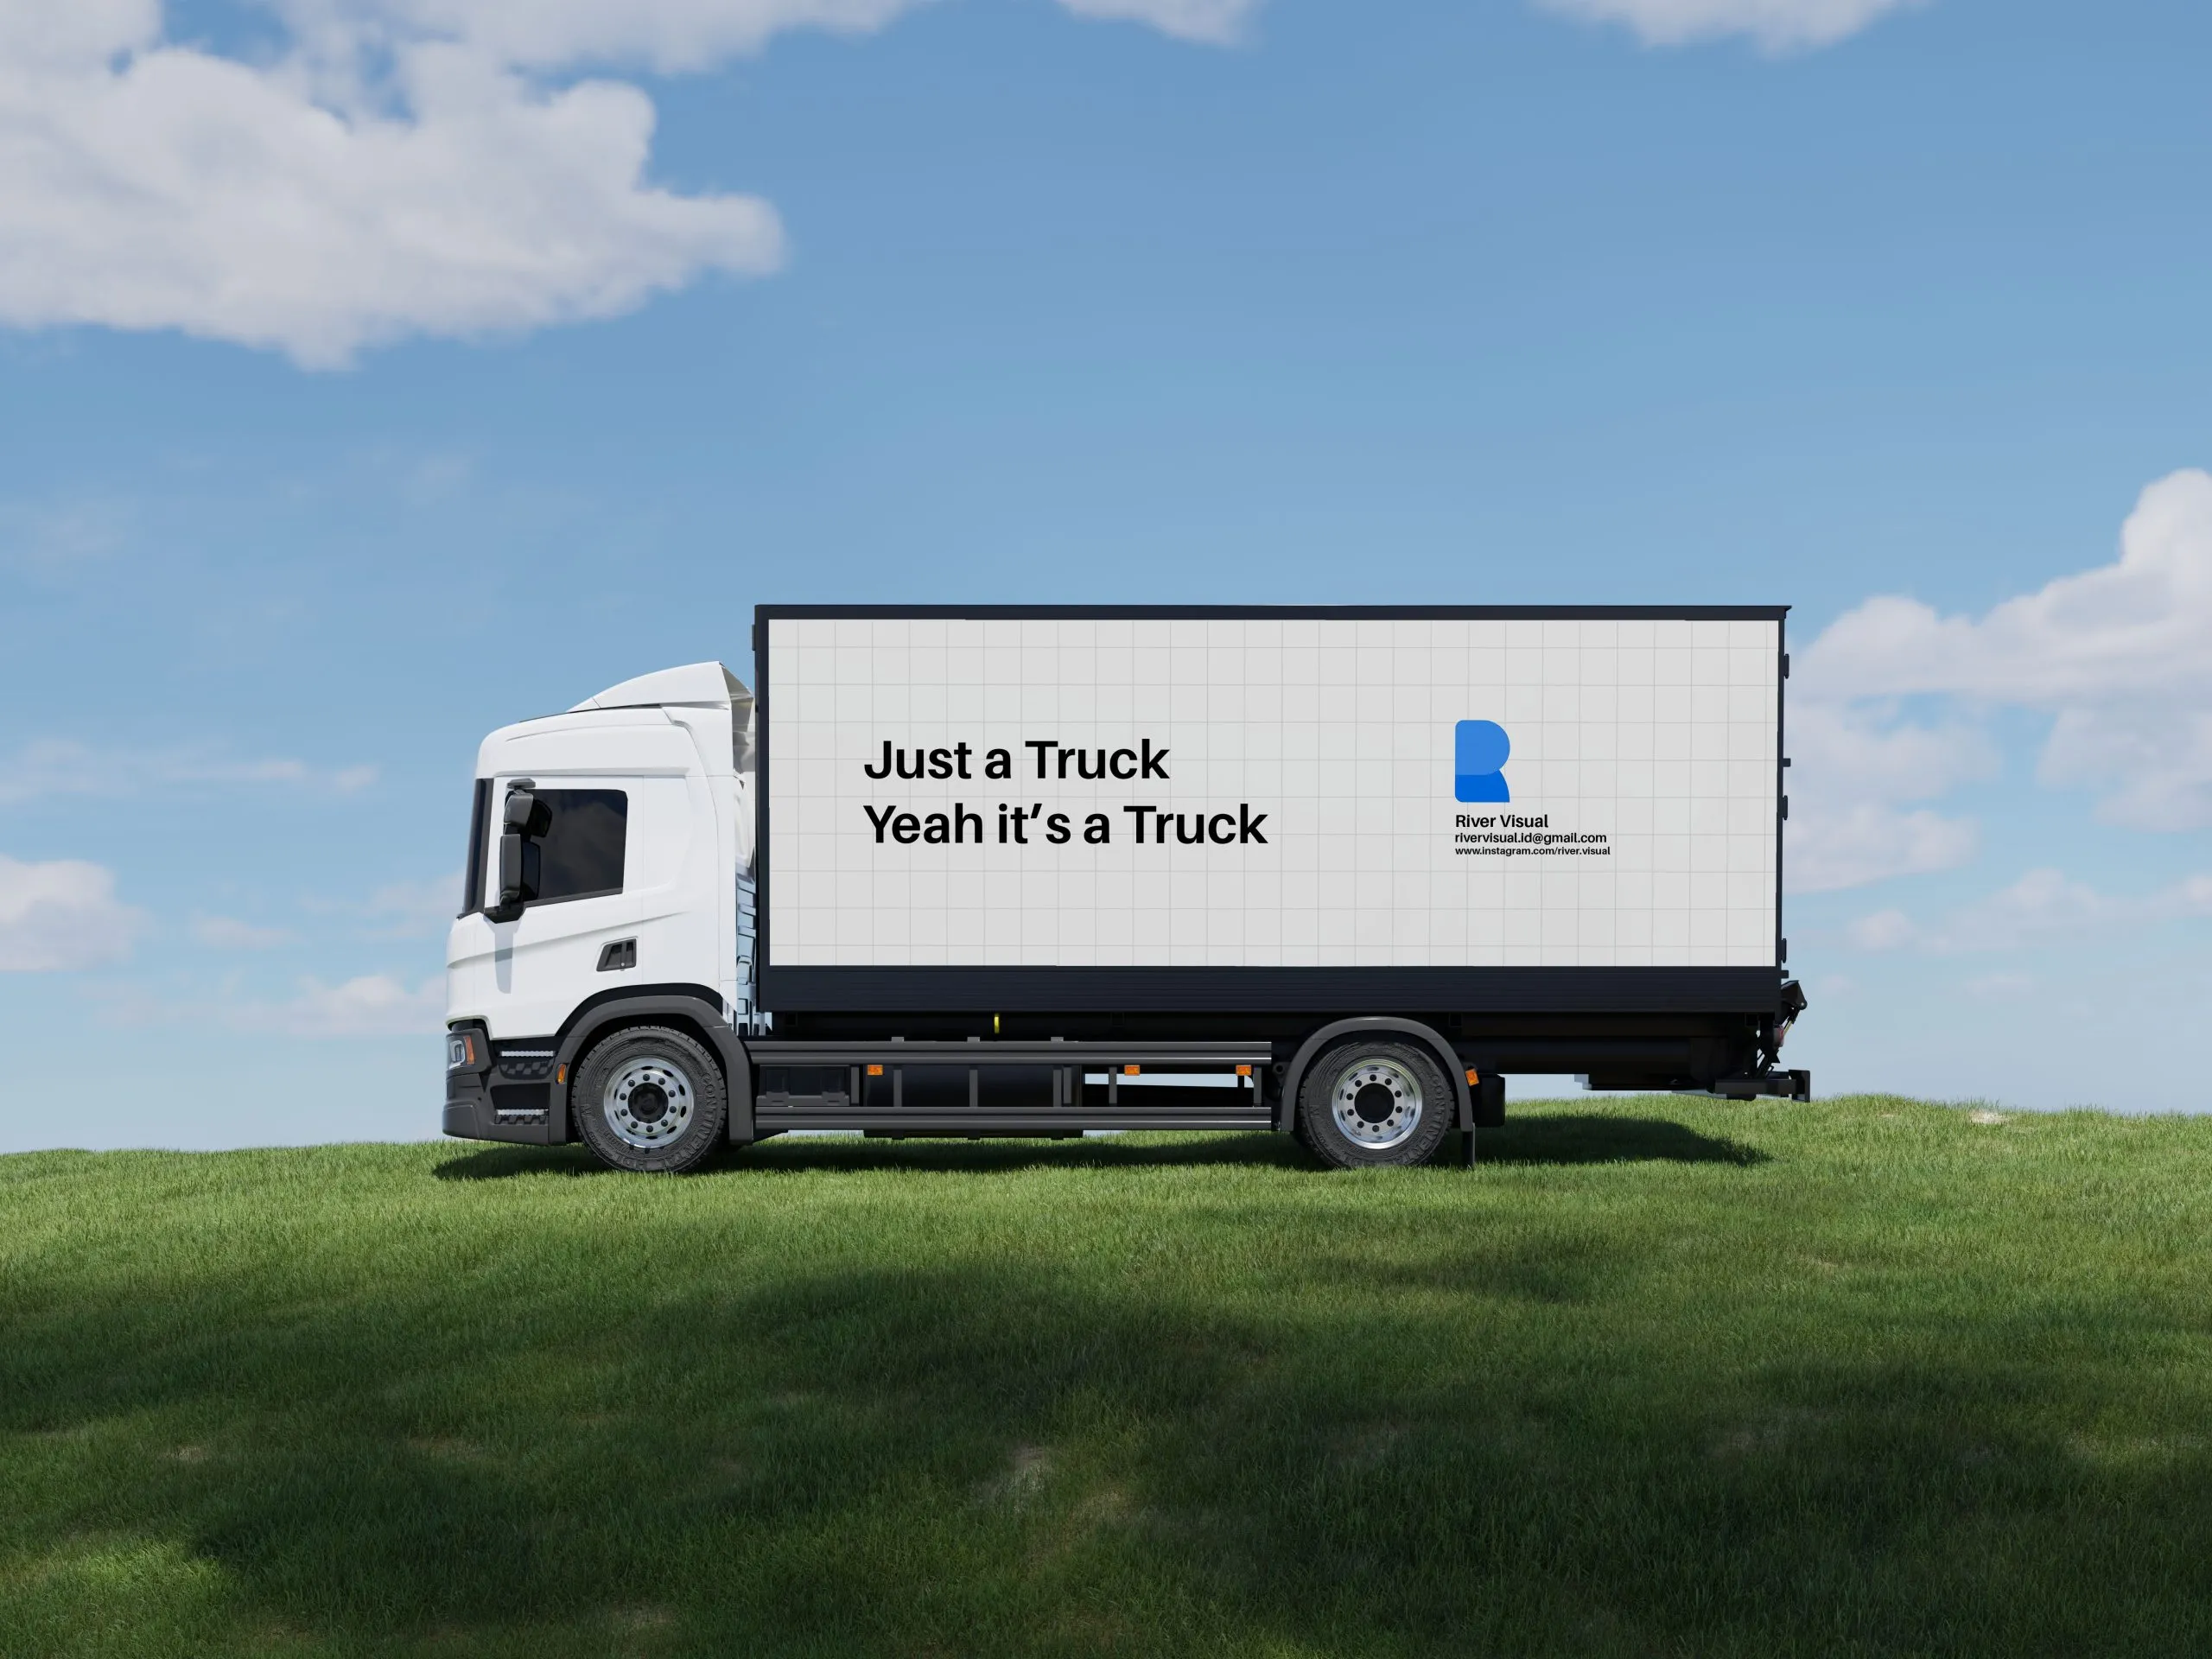 Truck in the Greenfield Mockup